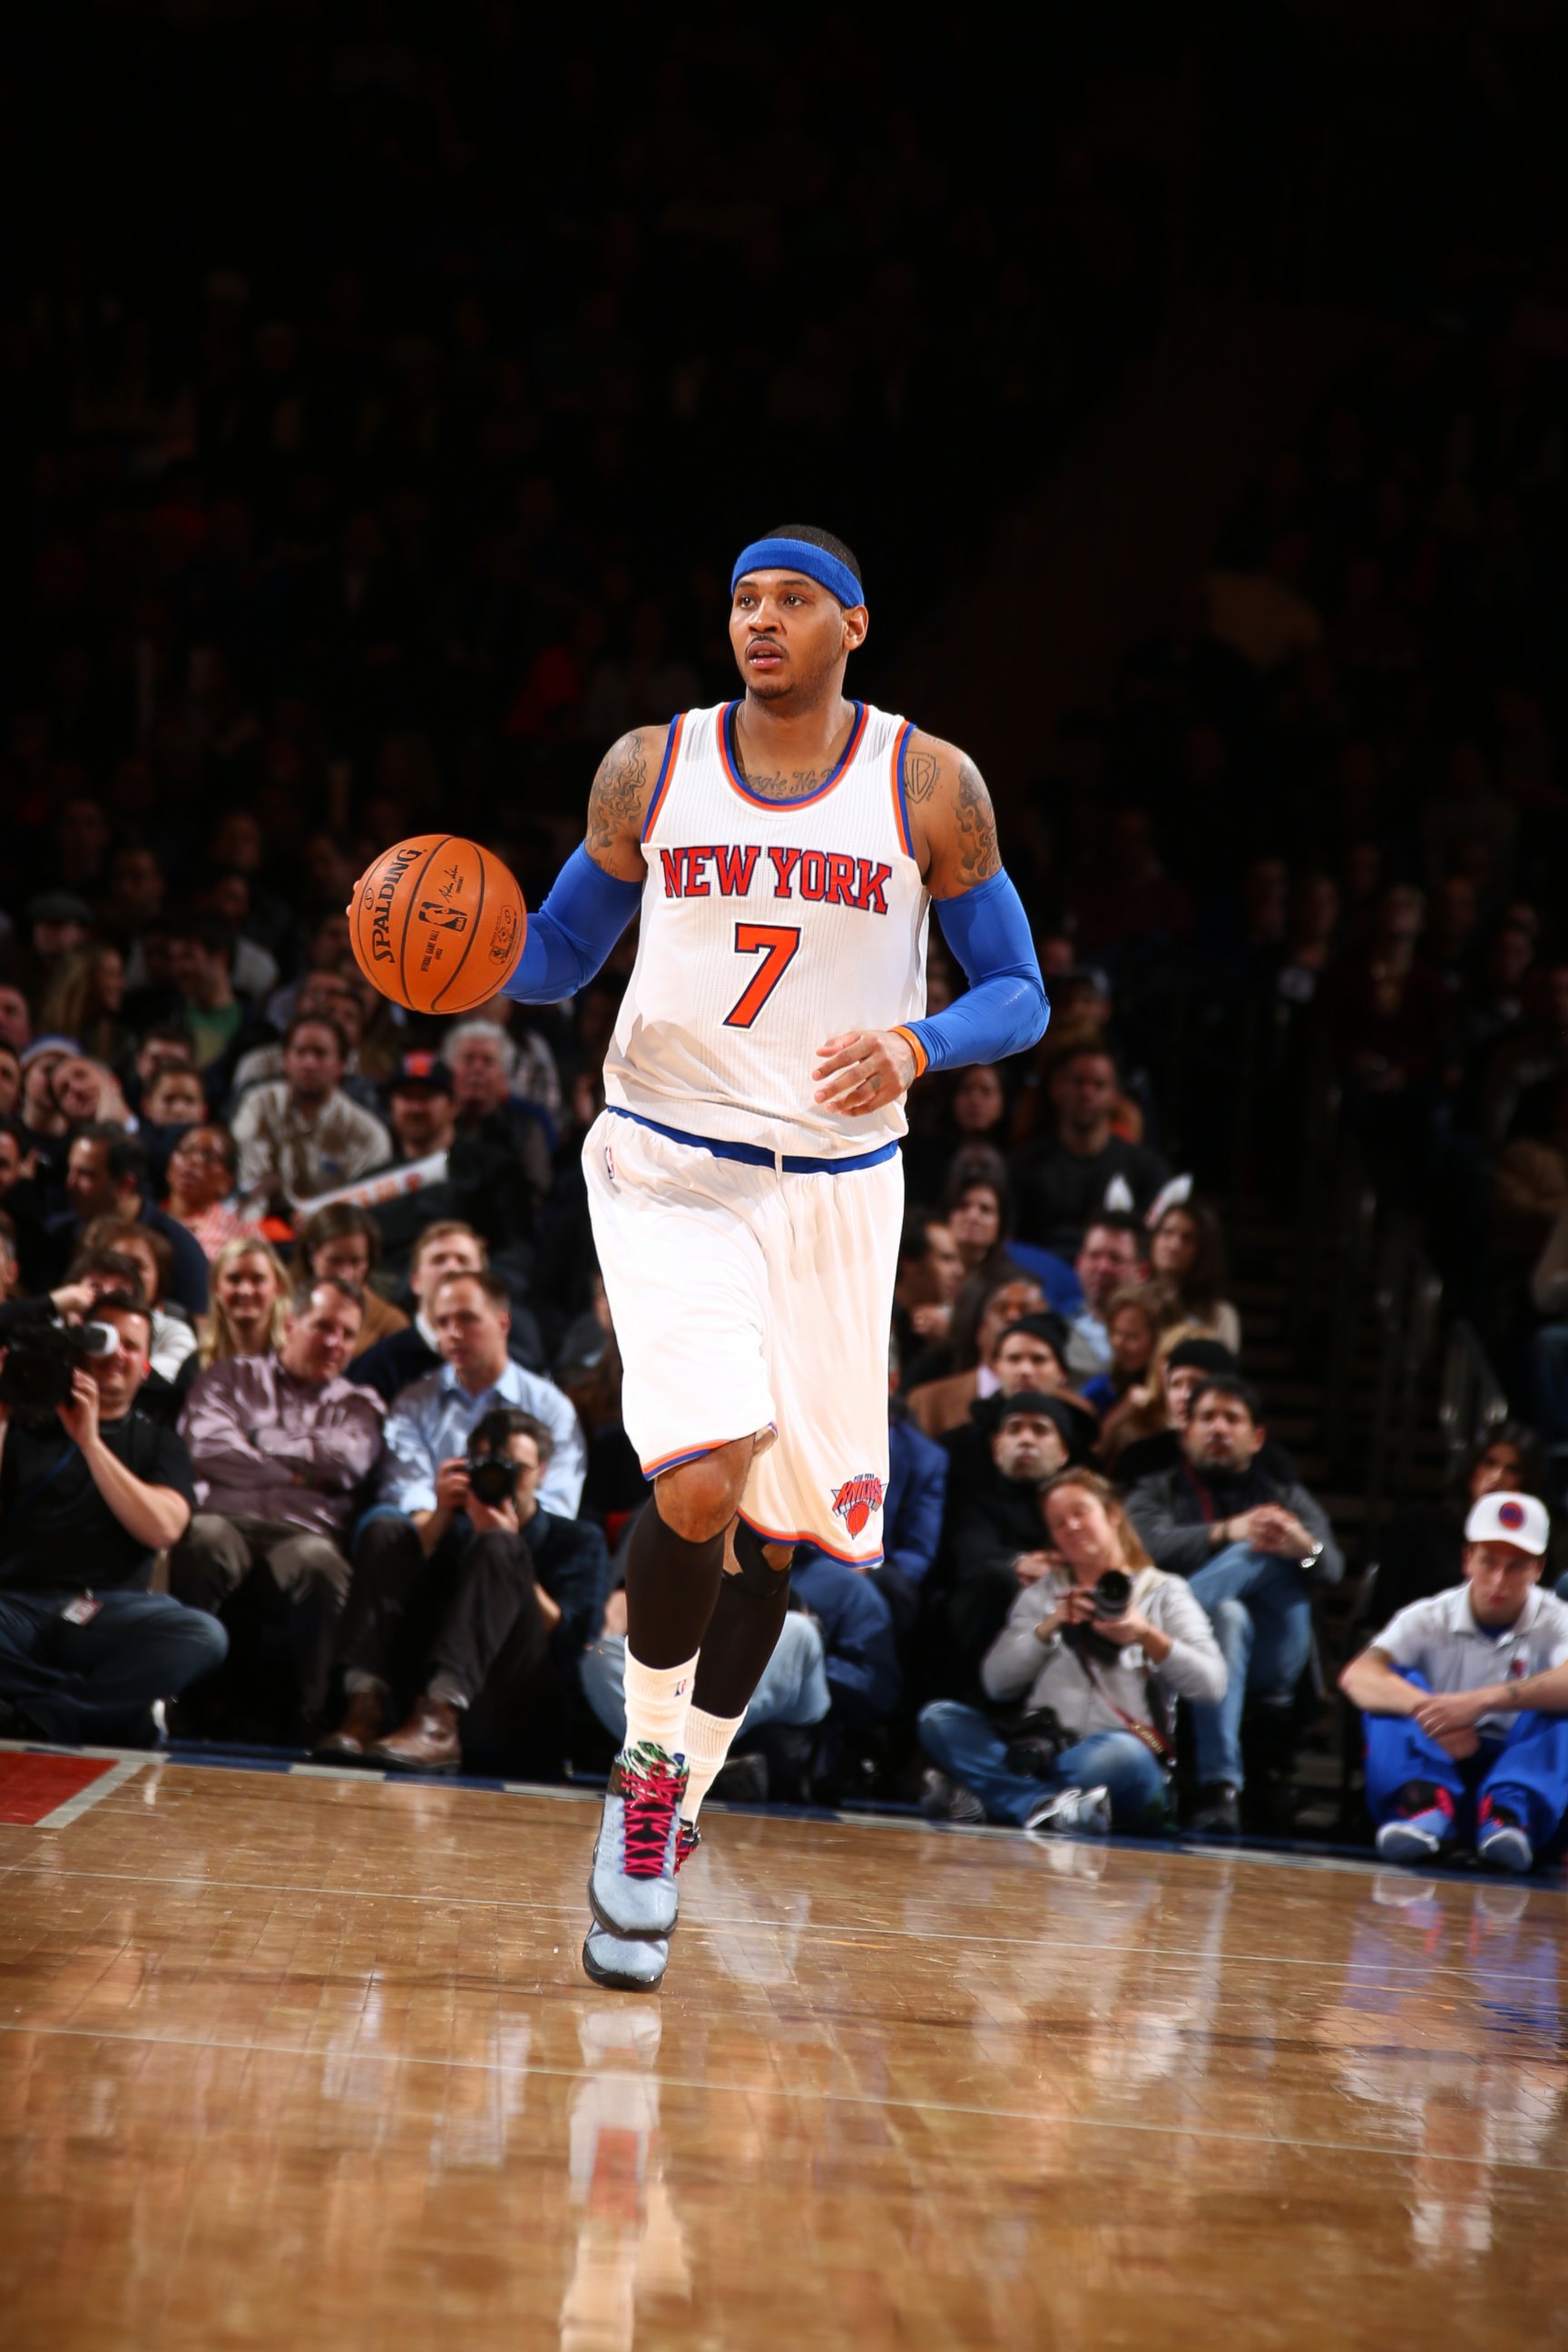 PHOTO: Carmelo Anthony of the New York Knicks brings the ball up court against the Boston Celtics on Feb. 3, 2015 at Madison Square Garden in New York City.  